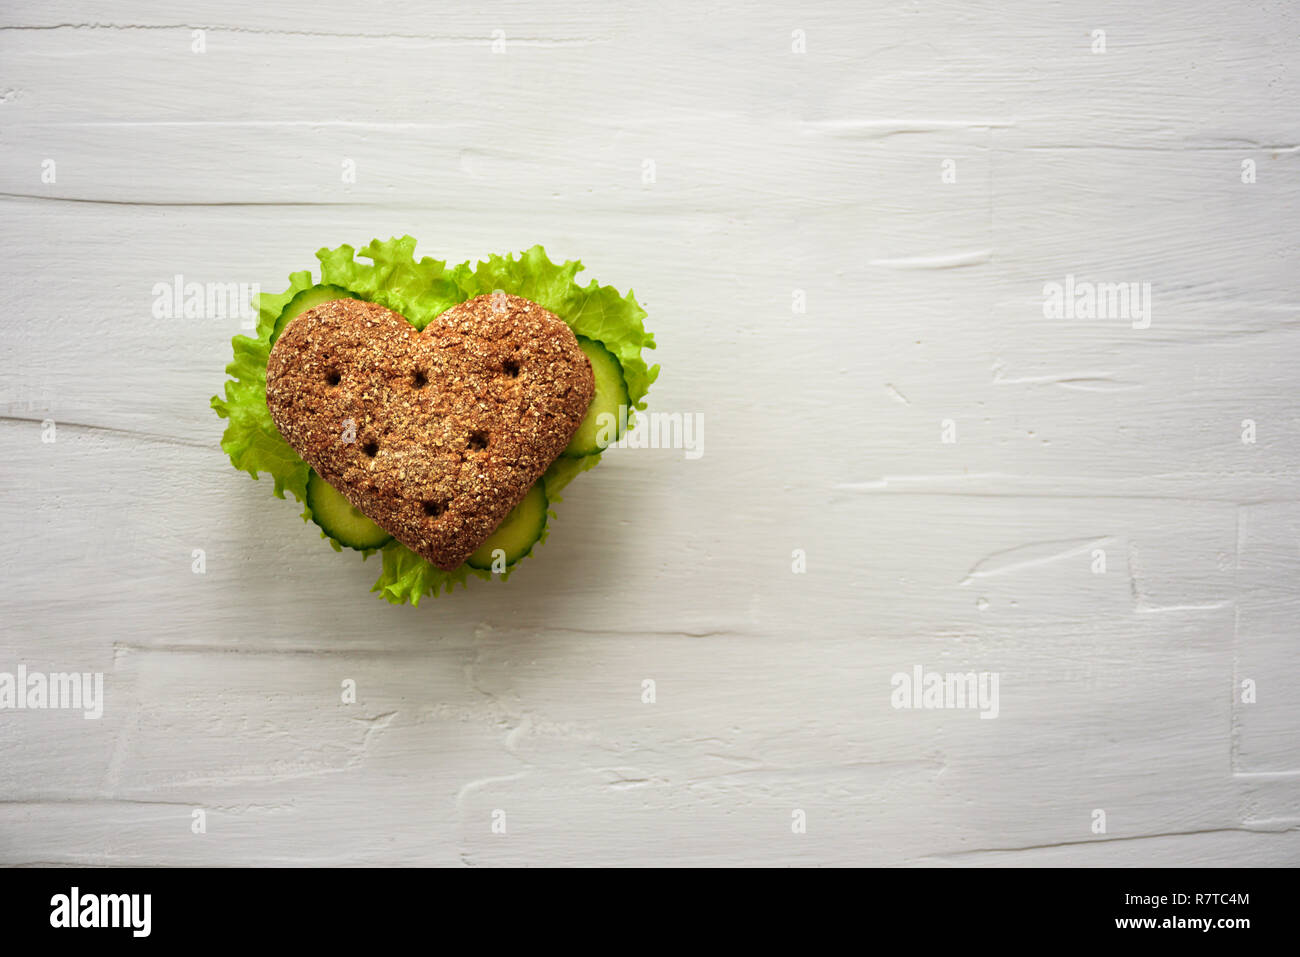 Healthy heart shape sandwich with salad and cucumbers. Dieting concept. White background Stock Photo